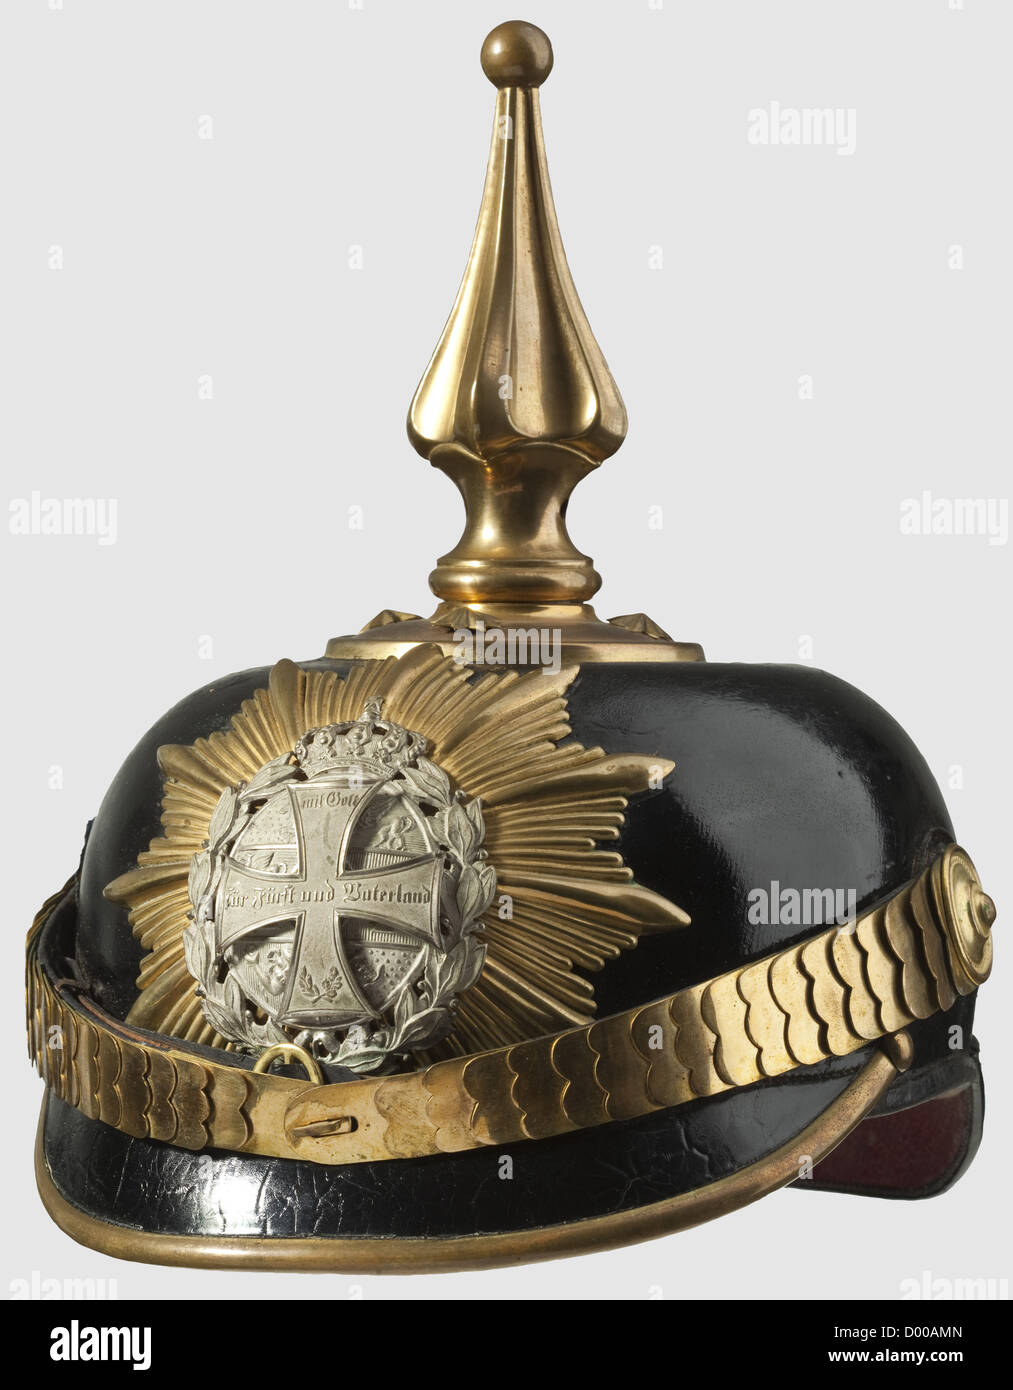 A helmet for officers of the Infantry Reserve or Medical Service,as worn until 1897.Leather skull with gilded mountings.The helmet spike is of the special Mecklenburg pattern with a turn-off ball finial.Silver-plated Mecklenburg arms displayed on the gilded star plate with a superimposed Landwehr cross,so mounted that it may be removed without a trace(no hole in the emblem).Flat metal chinscales.Silk national cockade on the right side.Ribbed silk lining with the owner's name 'Dr.Holm'.Beautifully preserved,rare helmet,historic,historical,19th cen,Additional-Rights-Clearences-Not Available Stock Photo